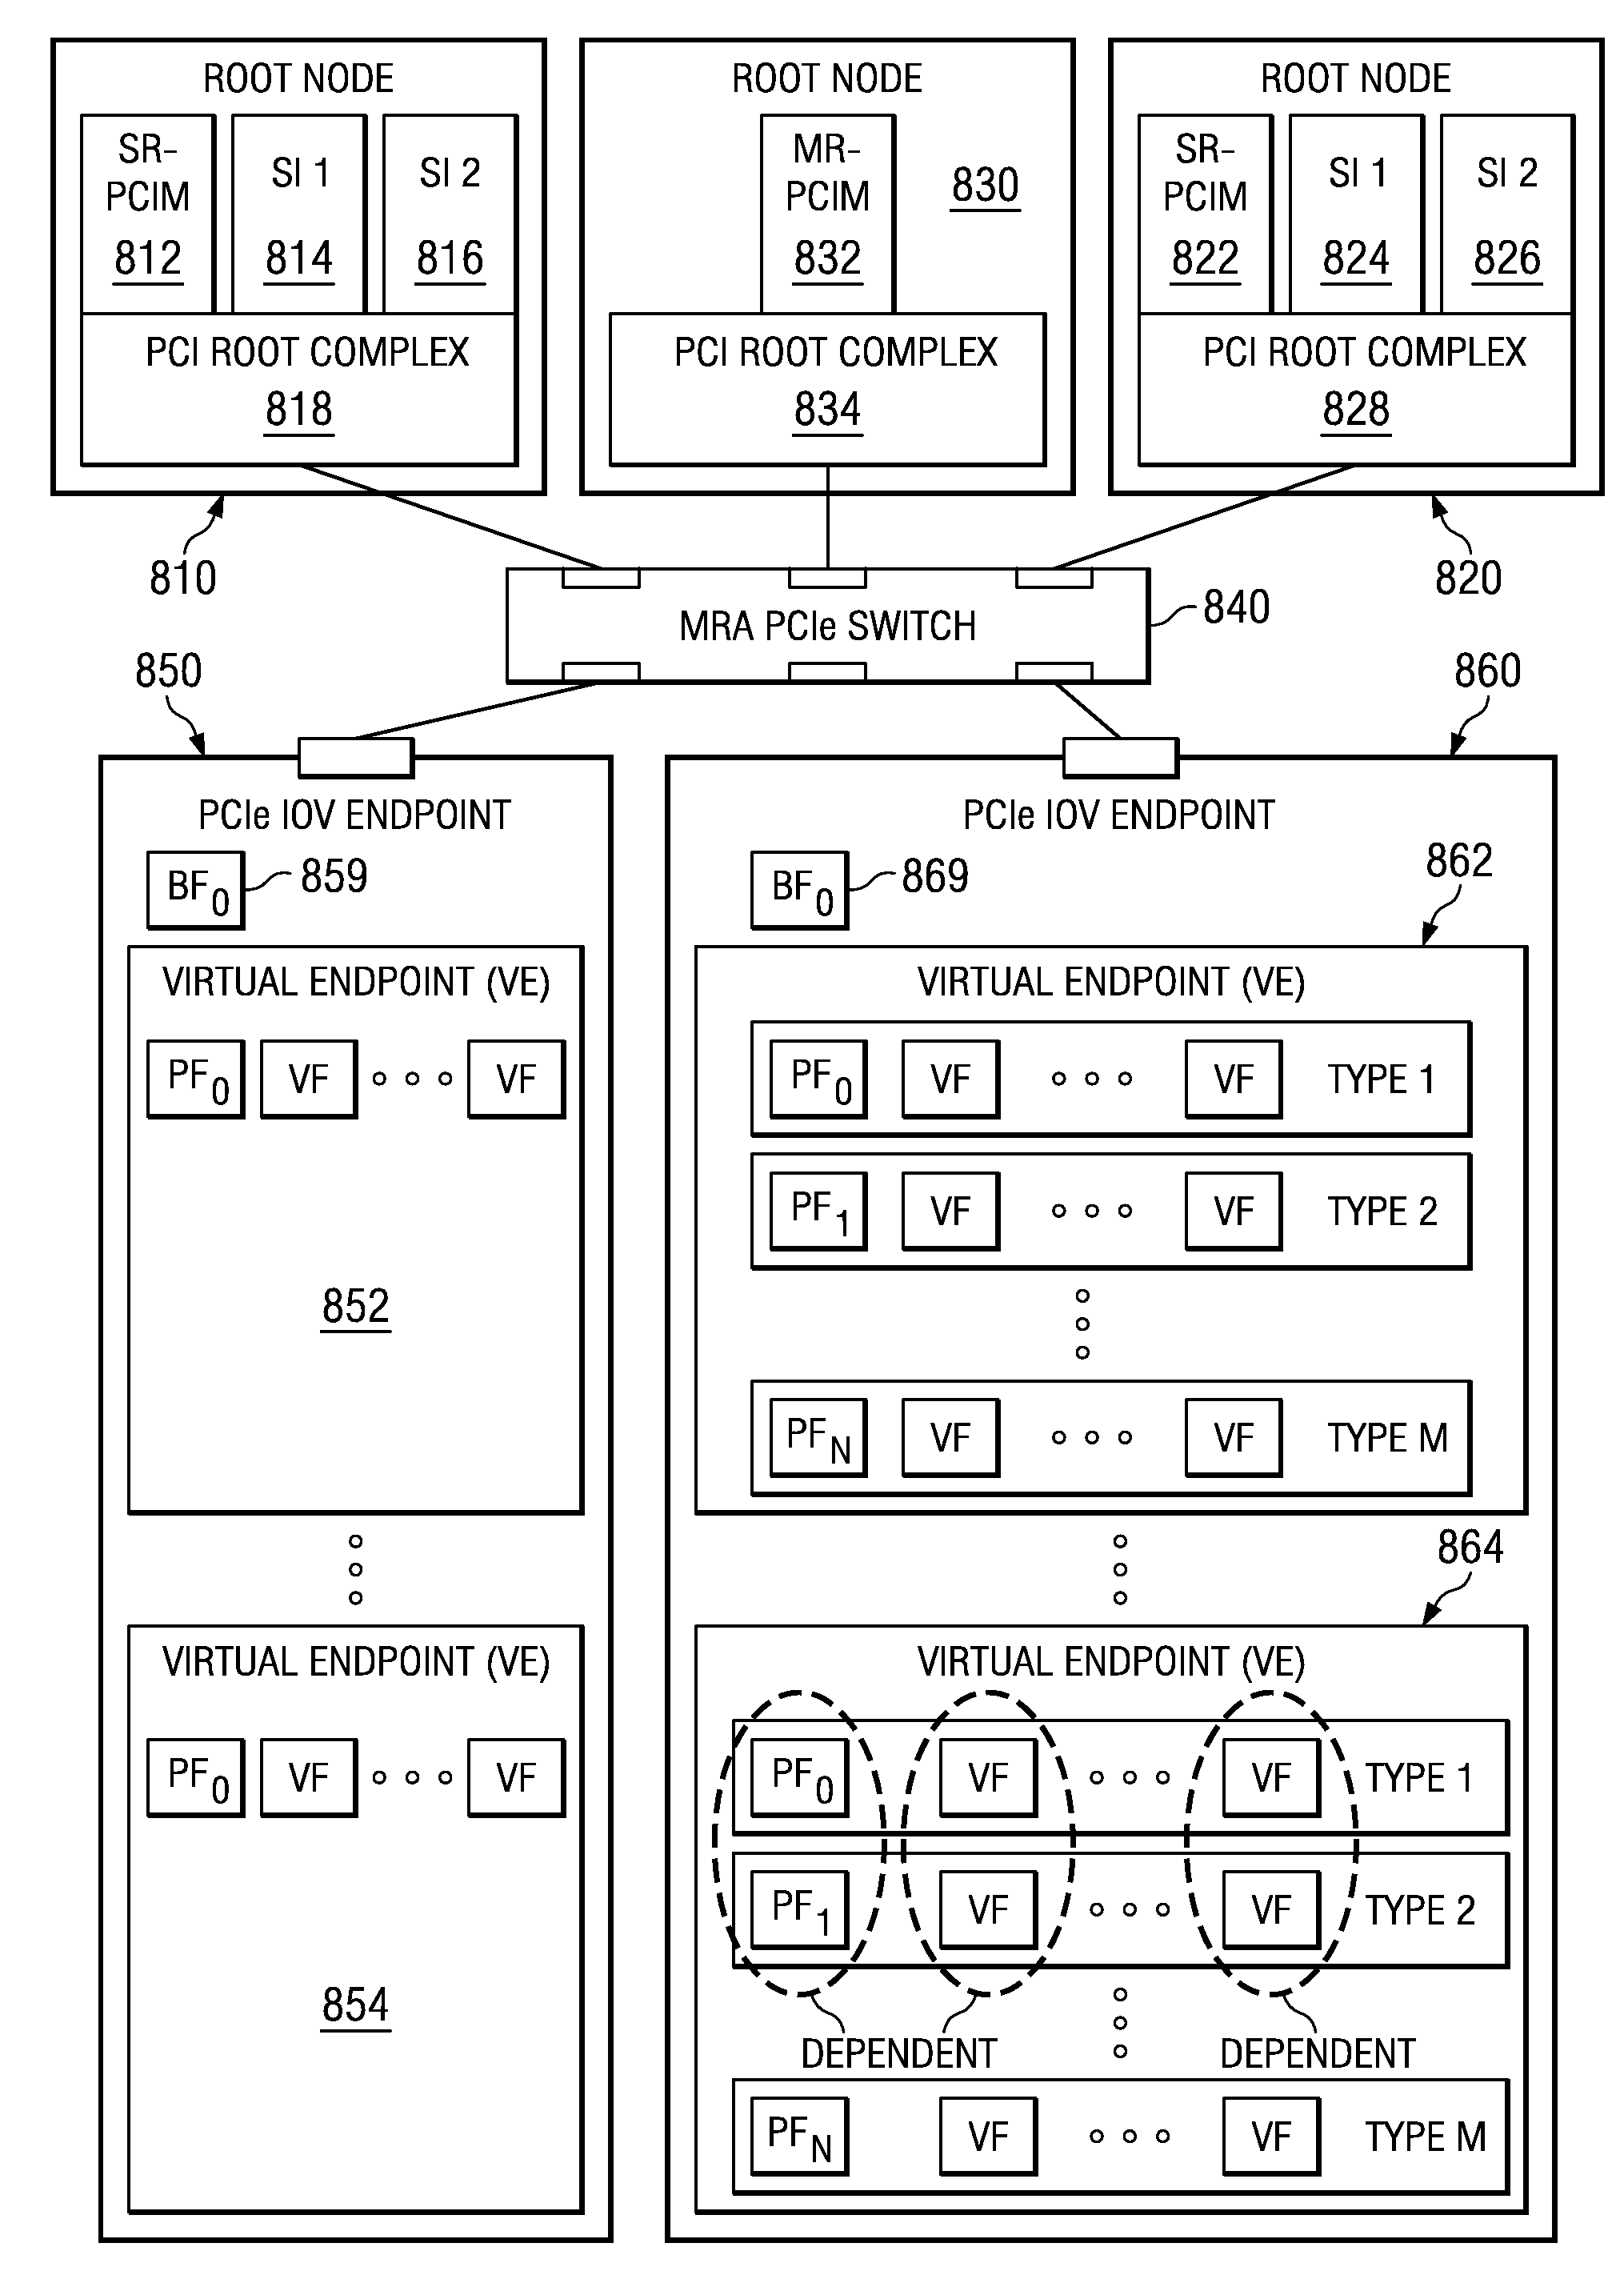 System and method for communication between host systems using a socket connection and shared memories